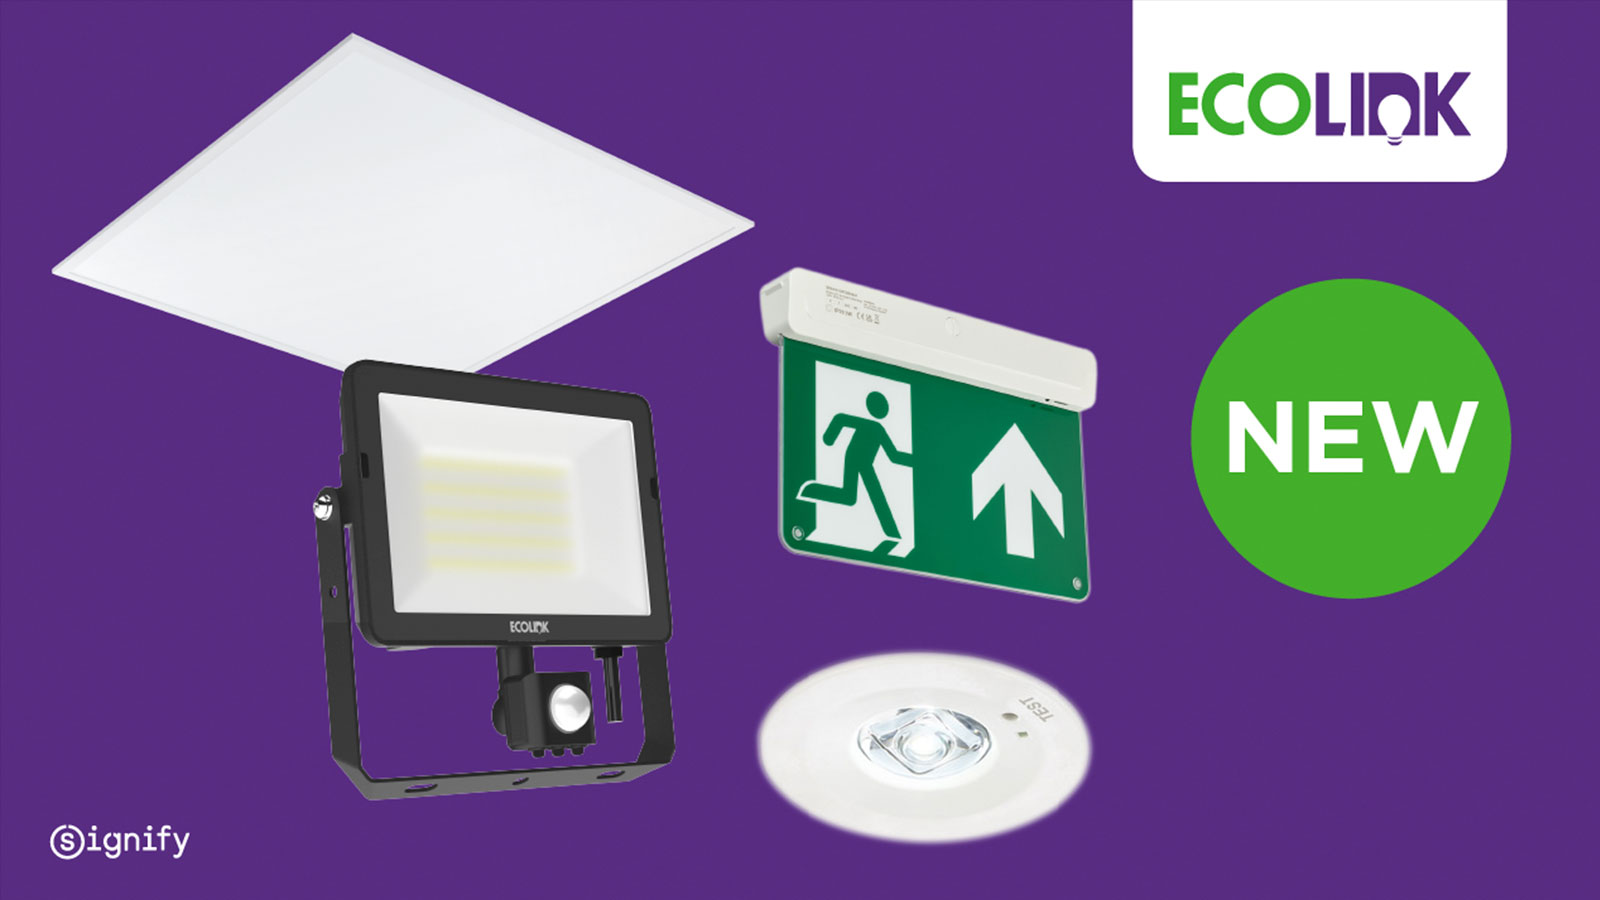 Signify has unveiled Ecolink, a new range of LED luminaires designed in the UK for electrical professionals